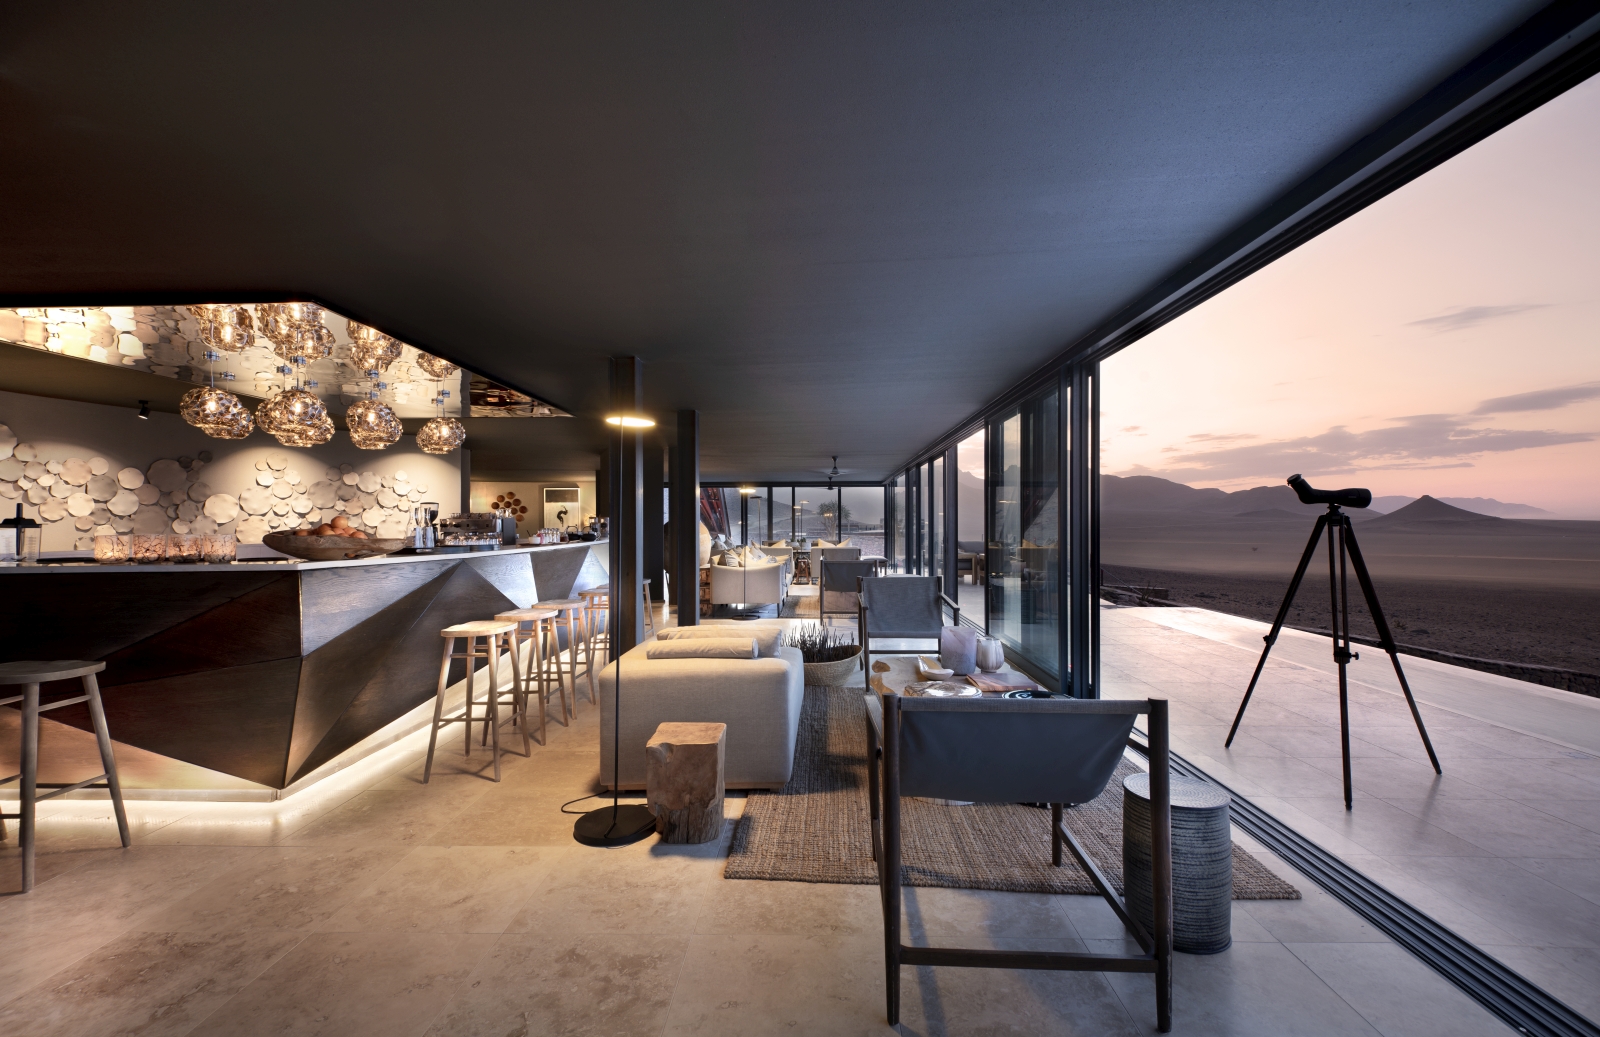 Lounge area with bar and veranda overlooking the desert